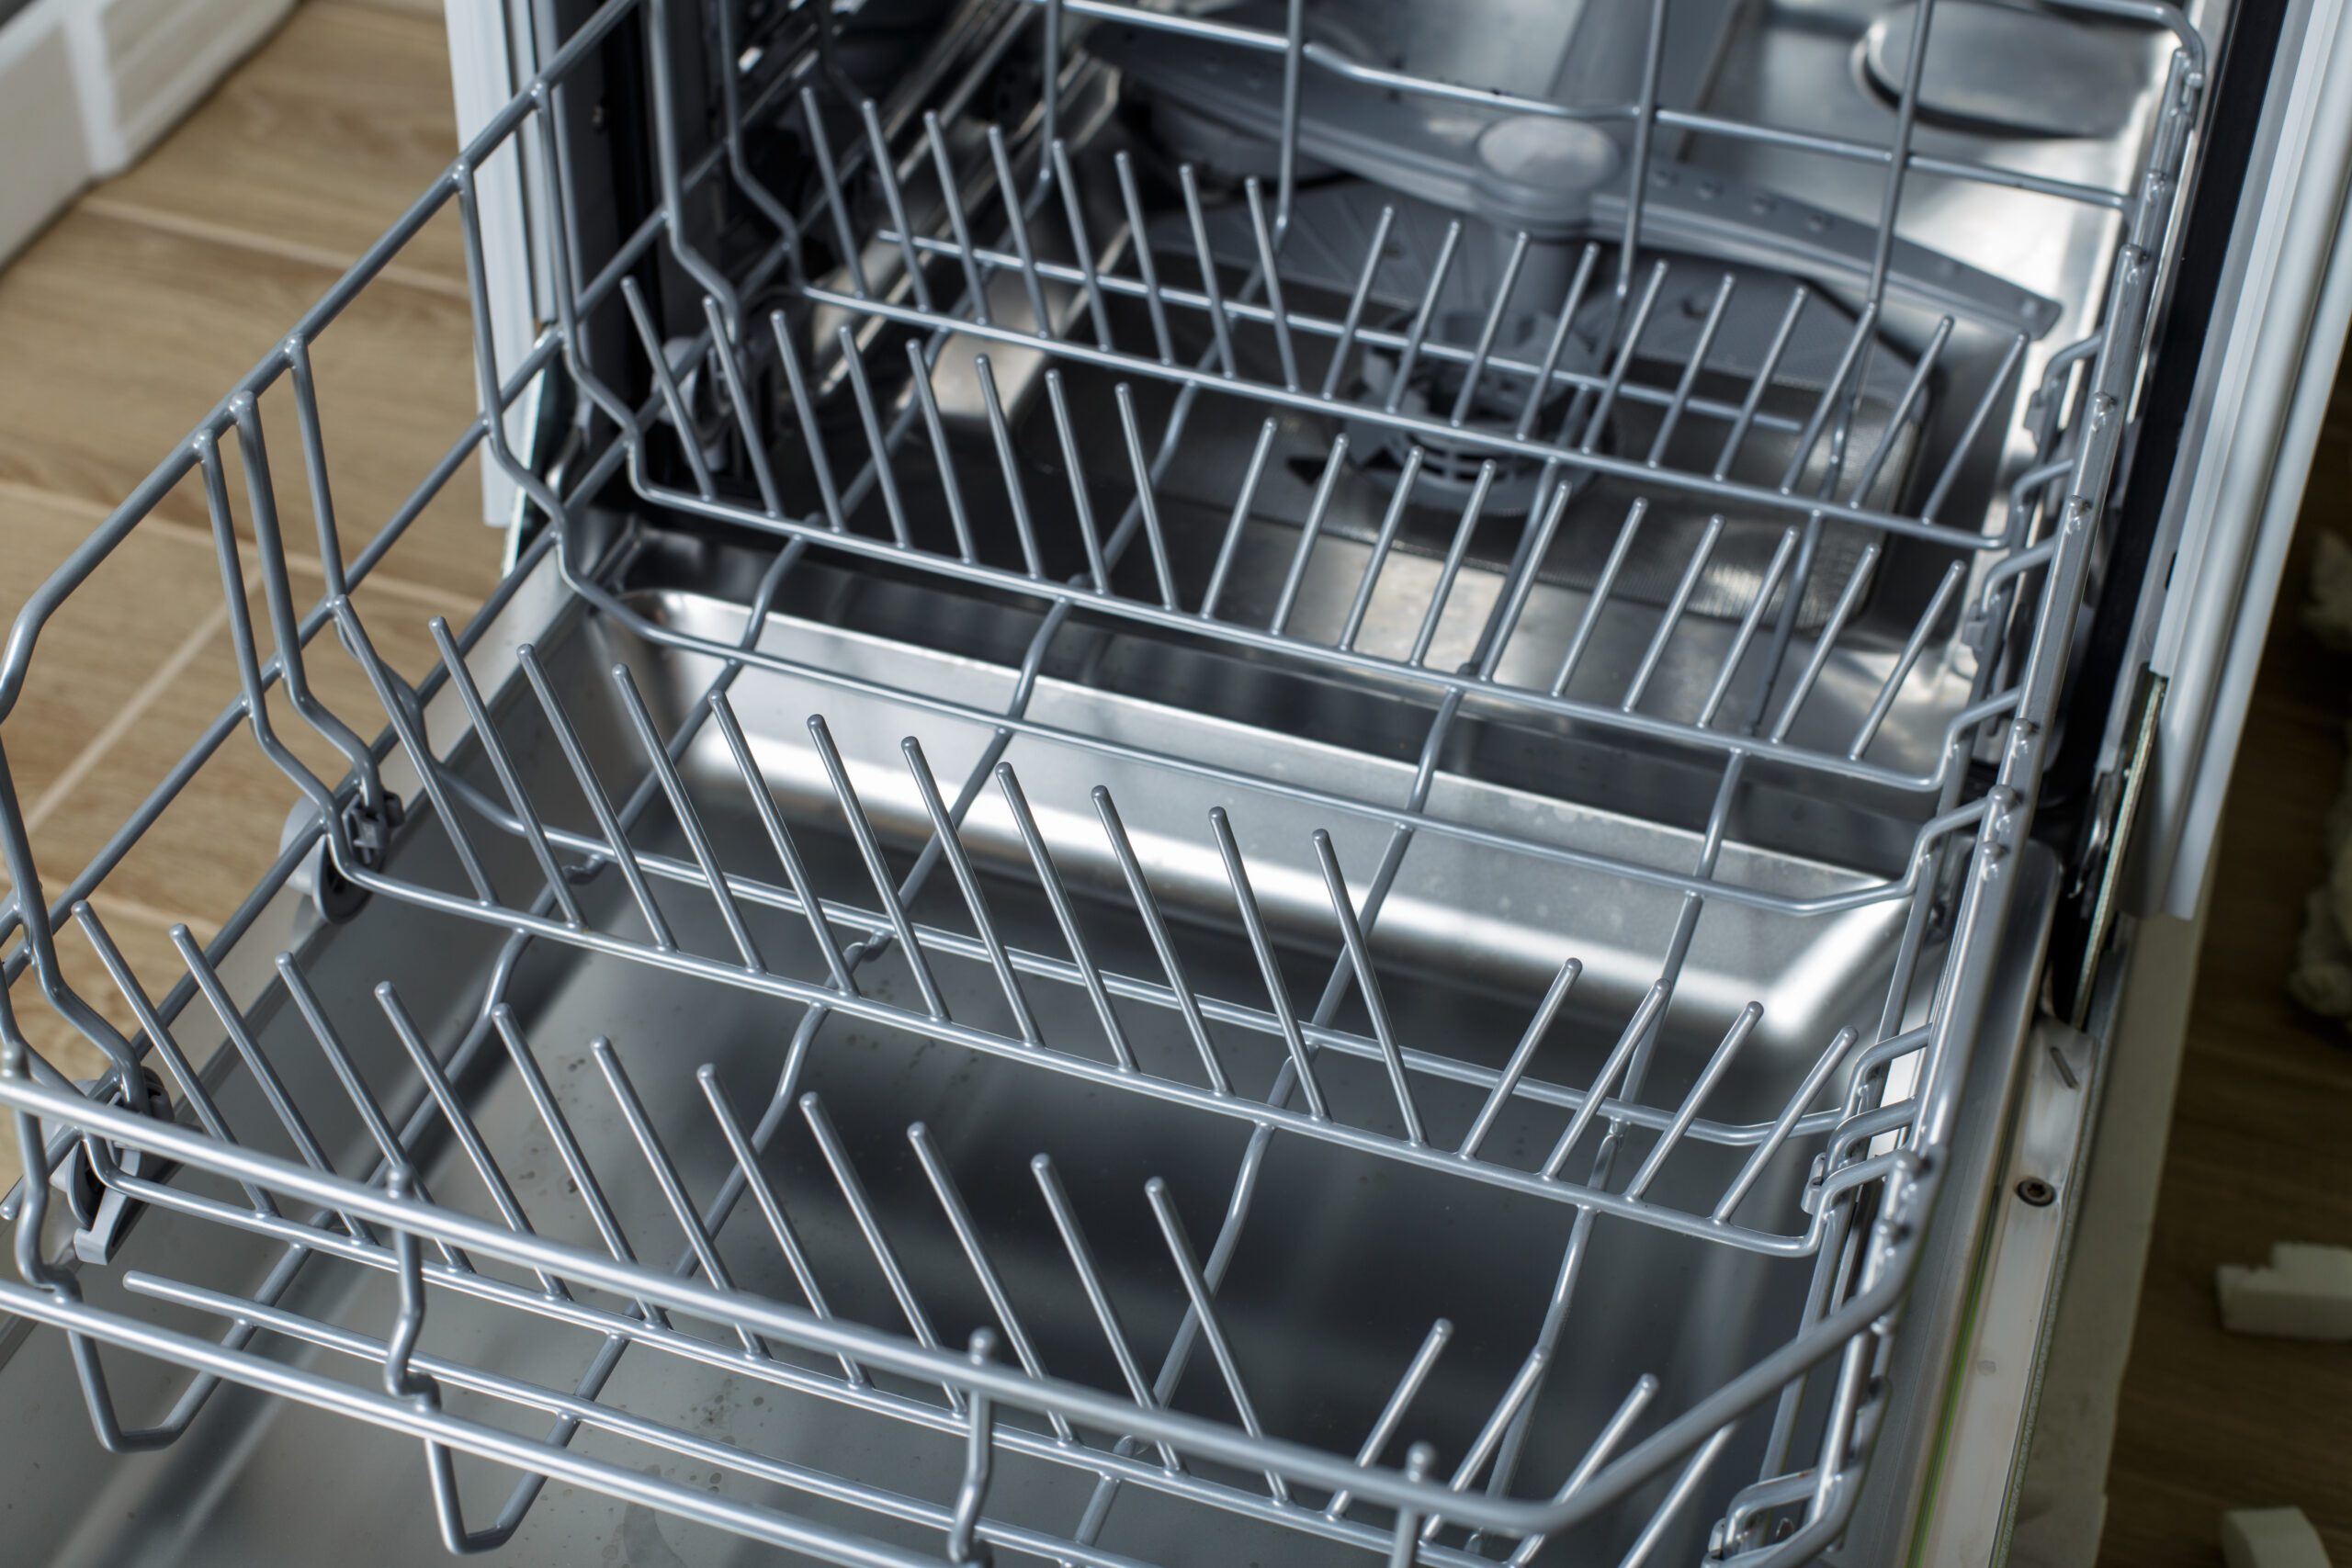 An open dishwasher with the bottom rack pulled out.